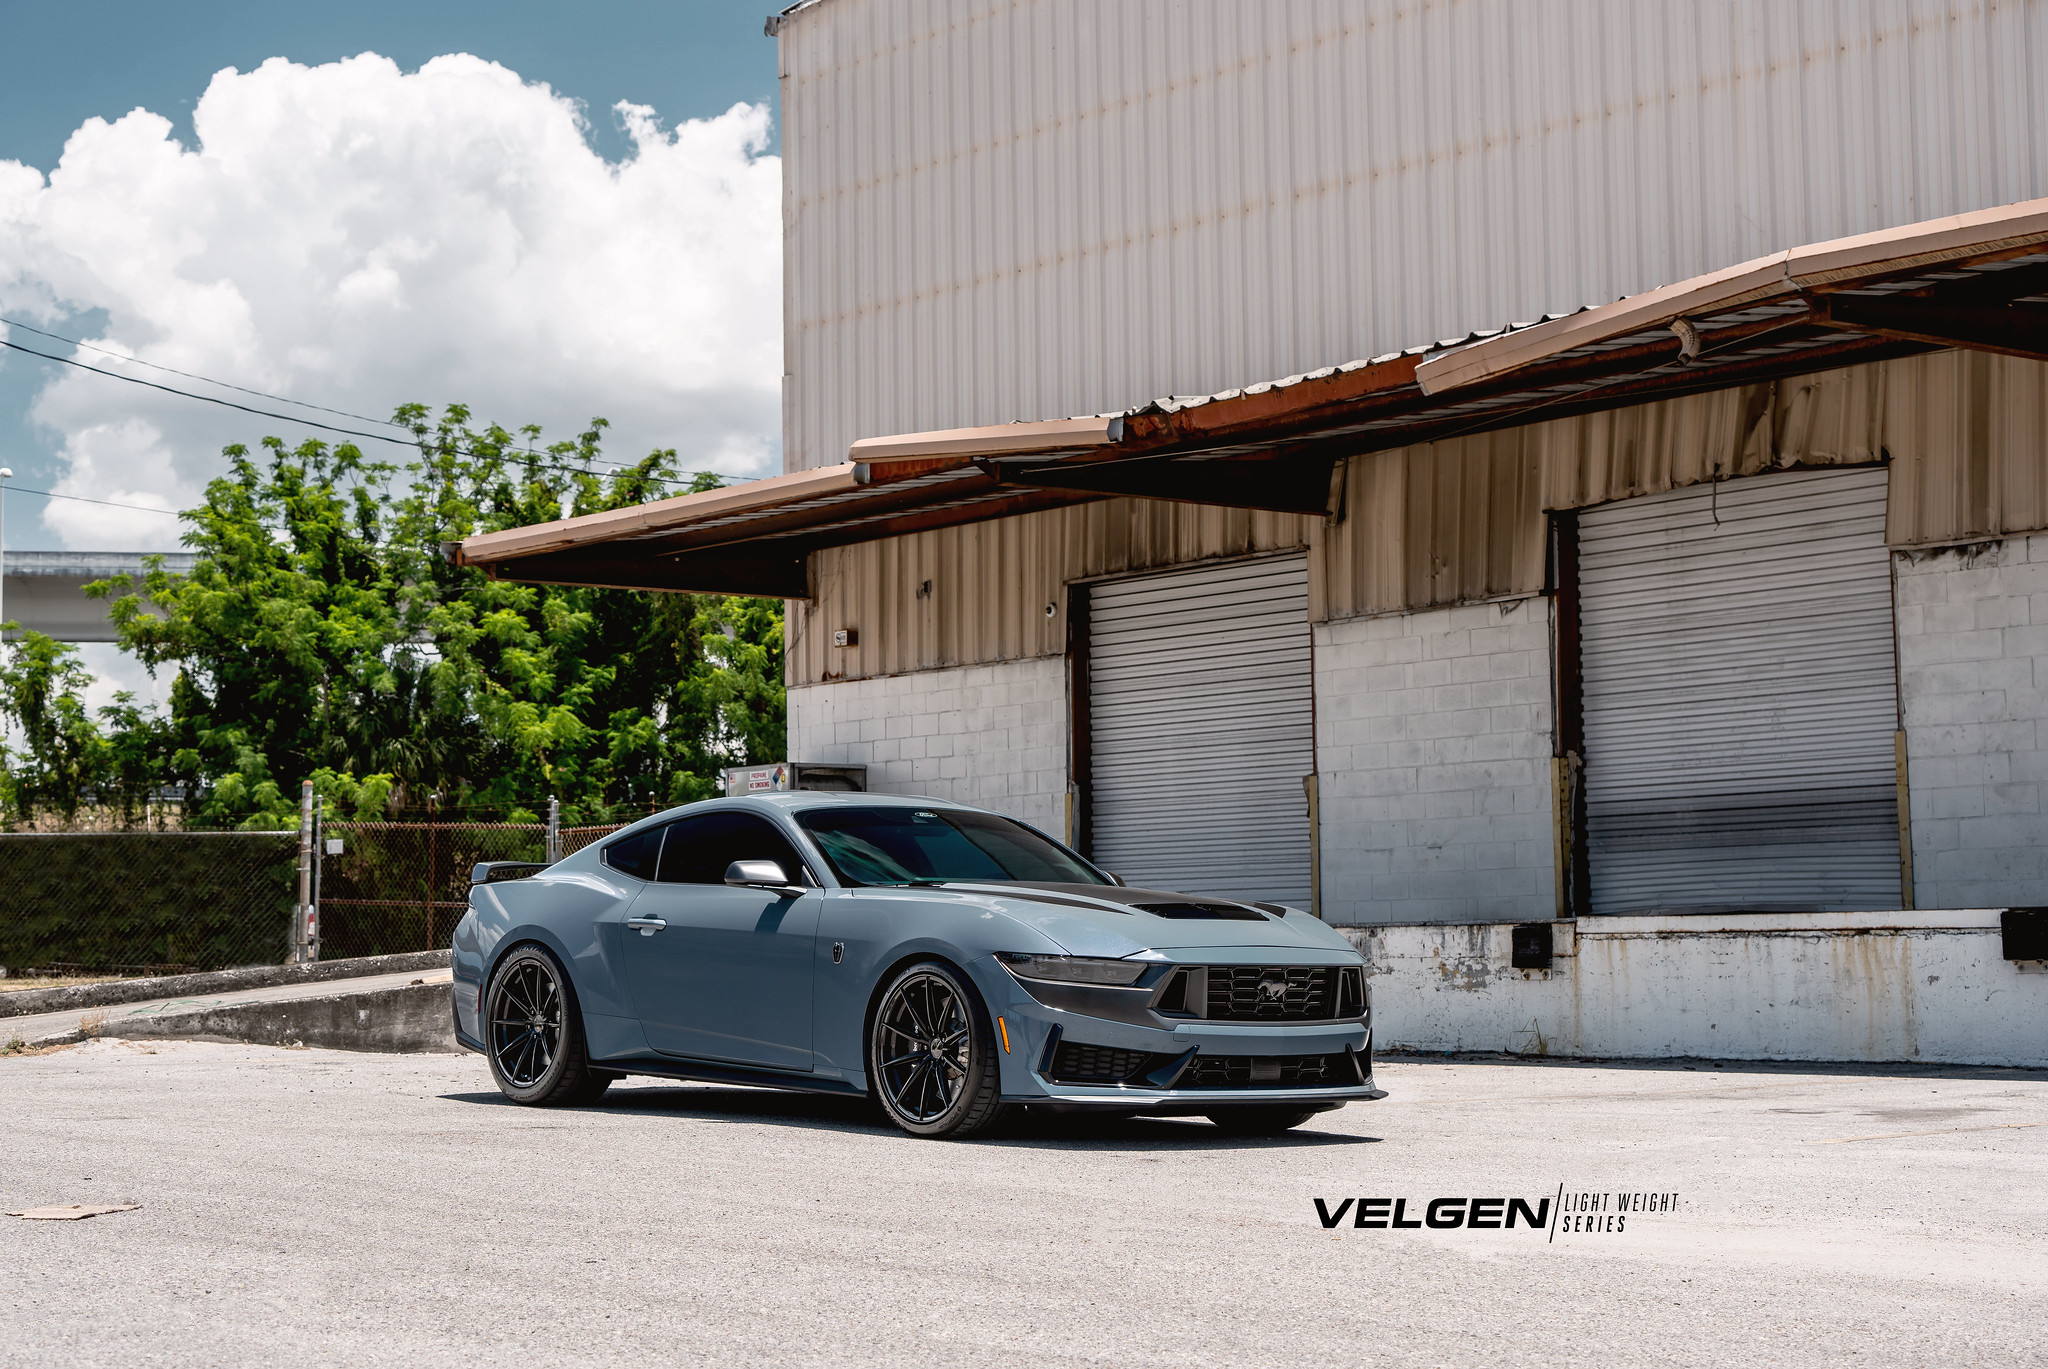 S650 Mustang 19" 20" Velgen Flow Forged Concave Wheels Mustang S650 - Vibe Motorsports Official Thread 53772081225_128e28b4c2_k